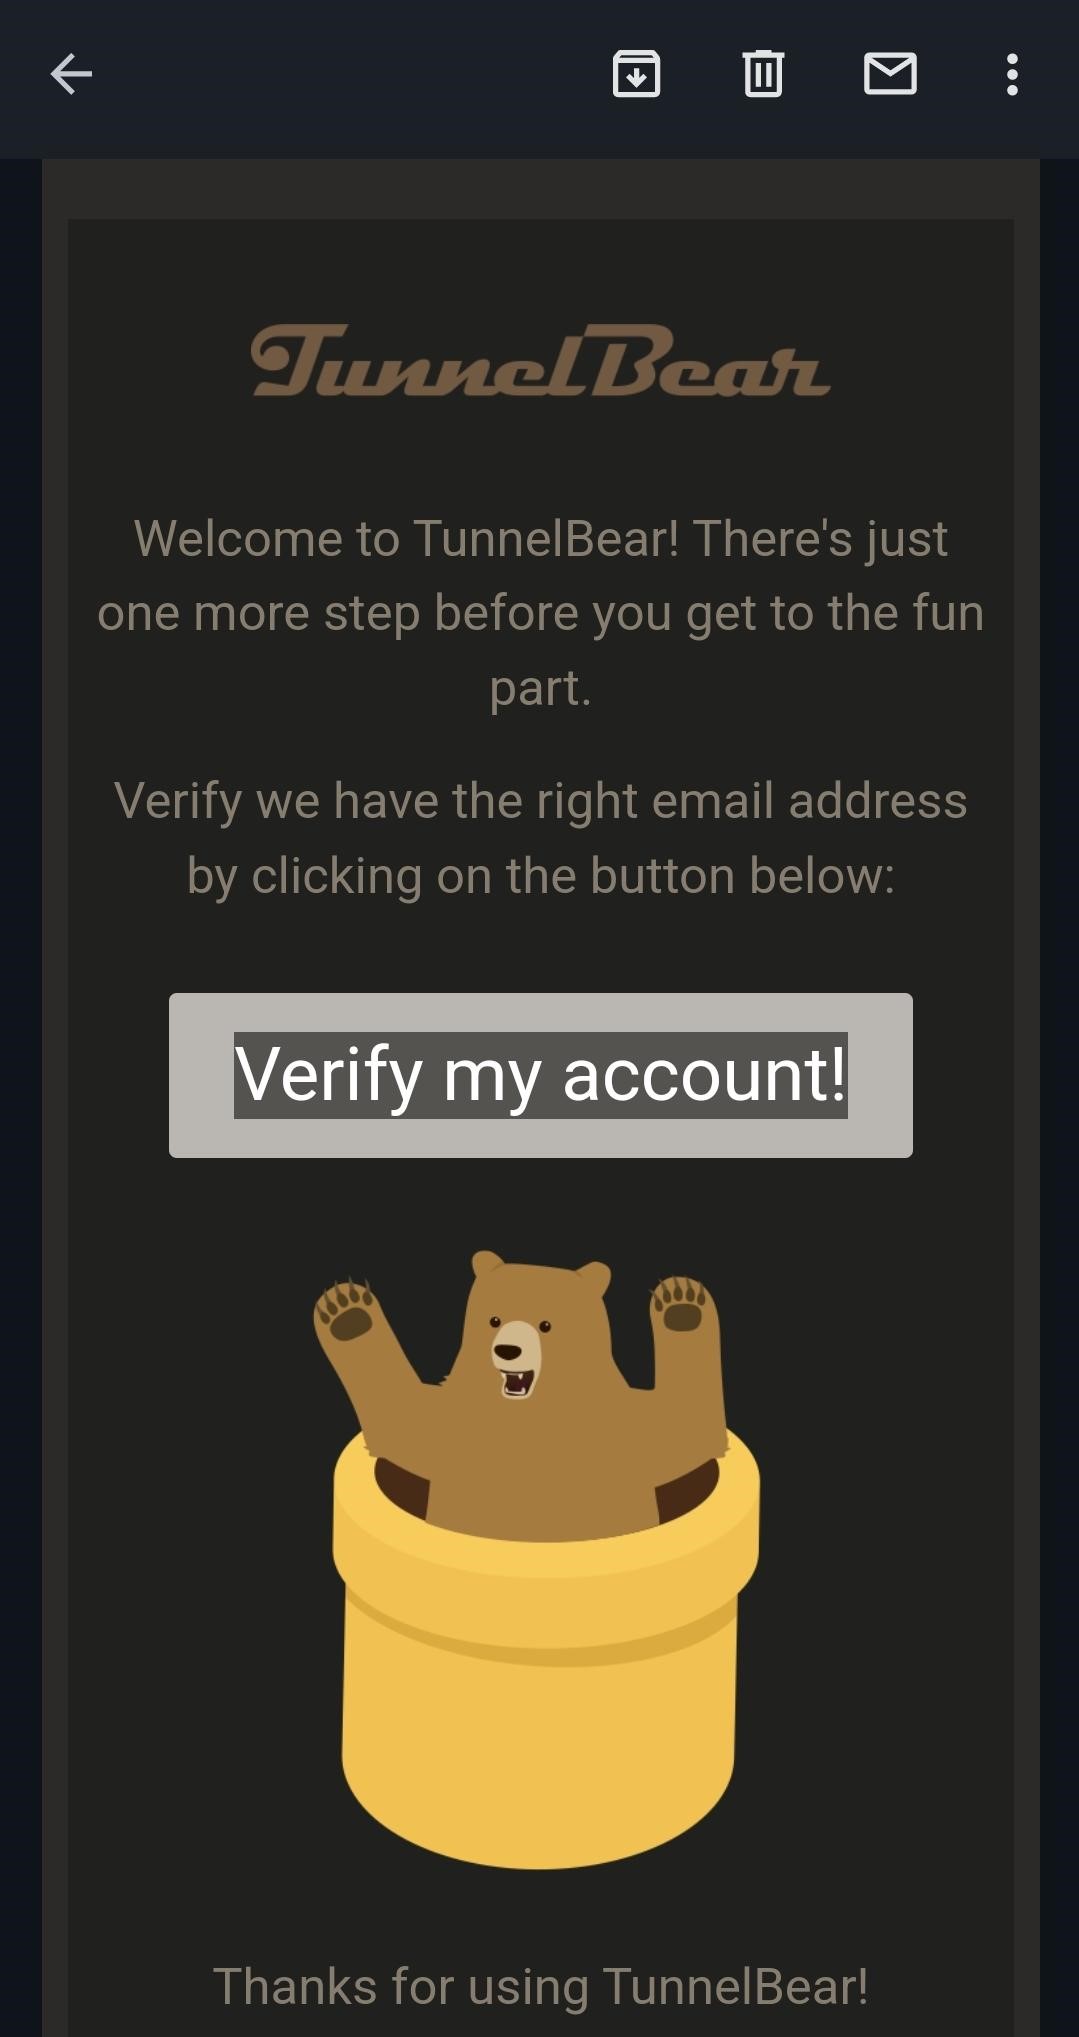 Confirmation email to verify email on TunnelBear